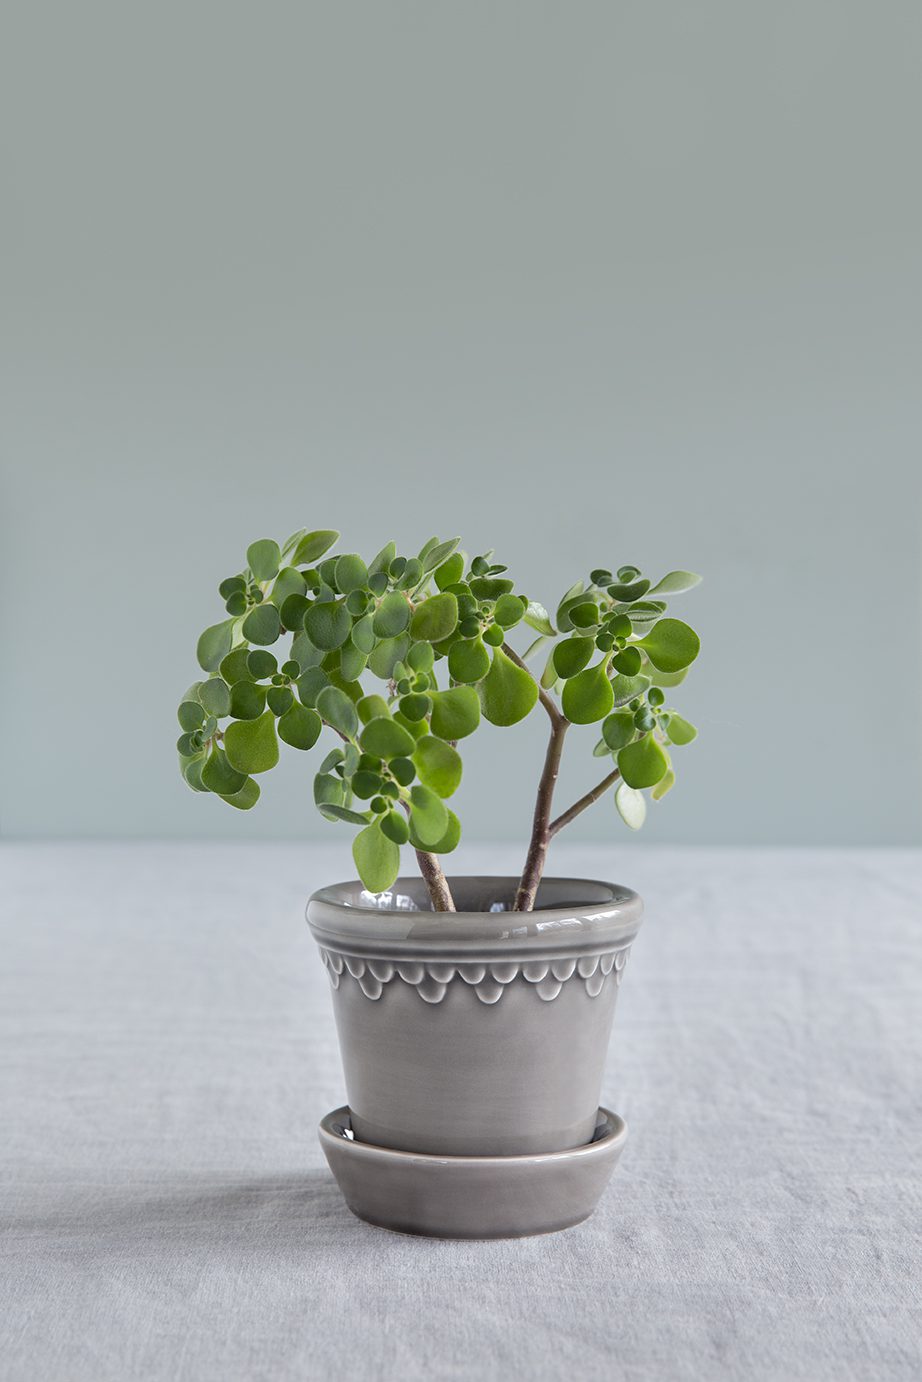 Glazed pearl grey pot with a small tree.